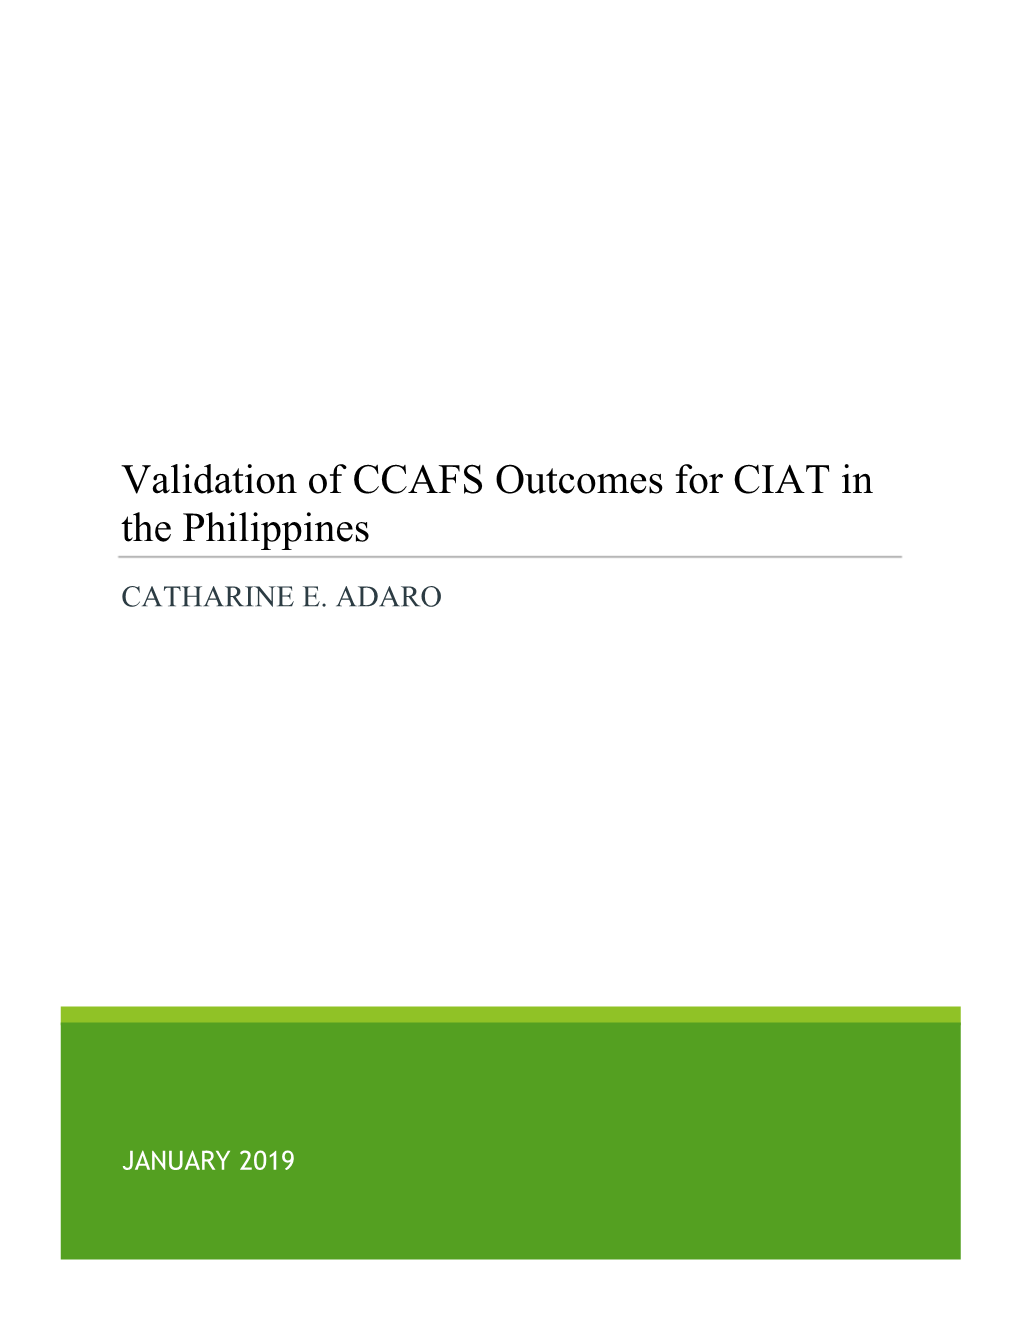 Validation of CCAFS Outcomes for CIAT in the Philippines